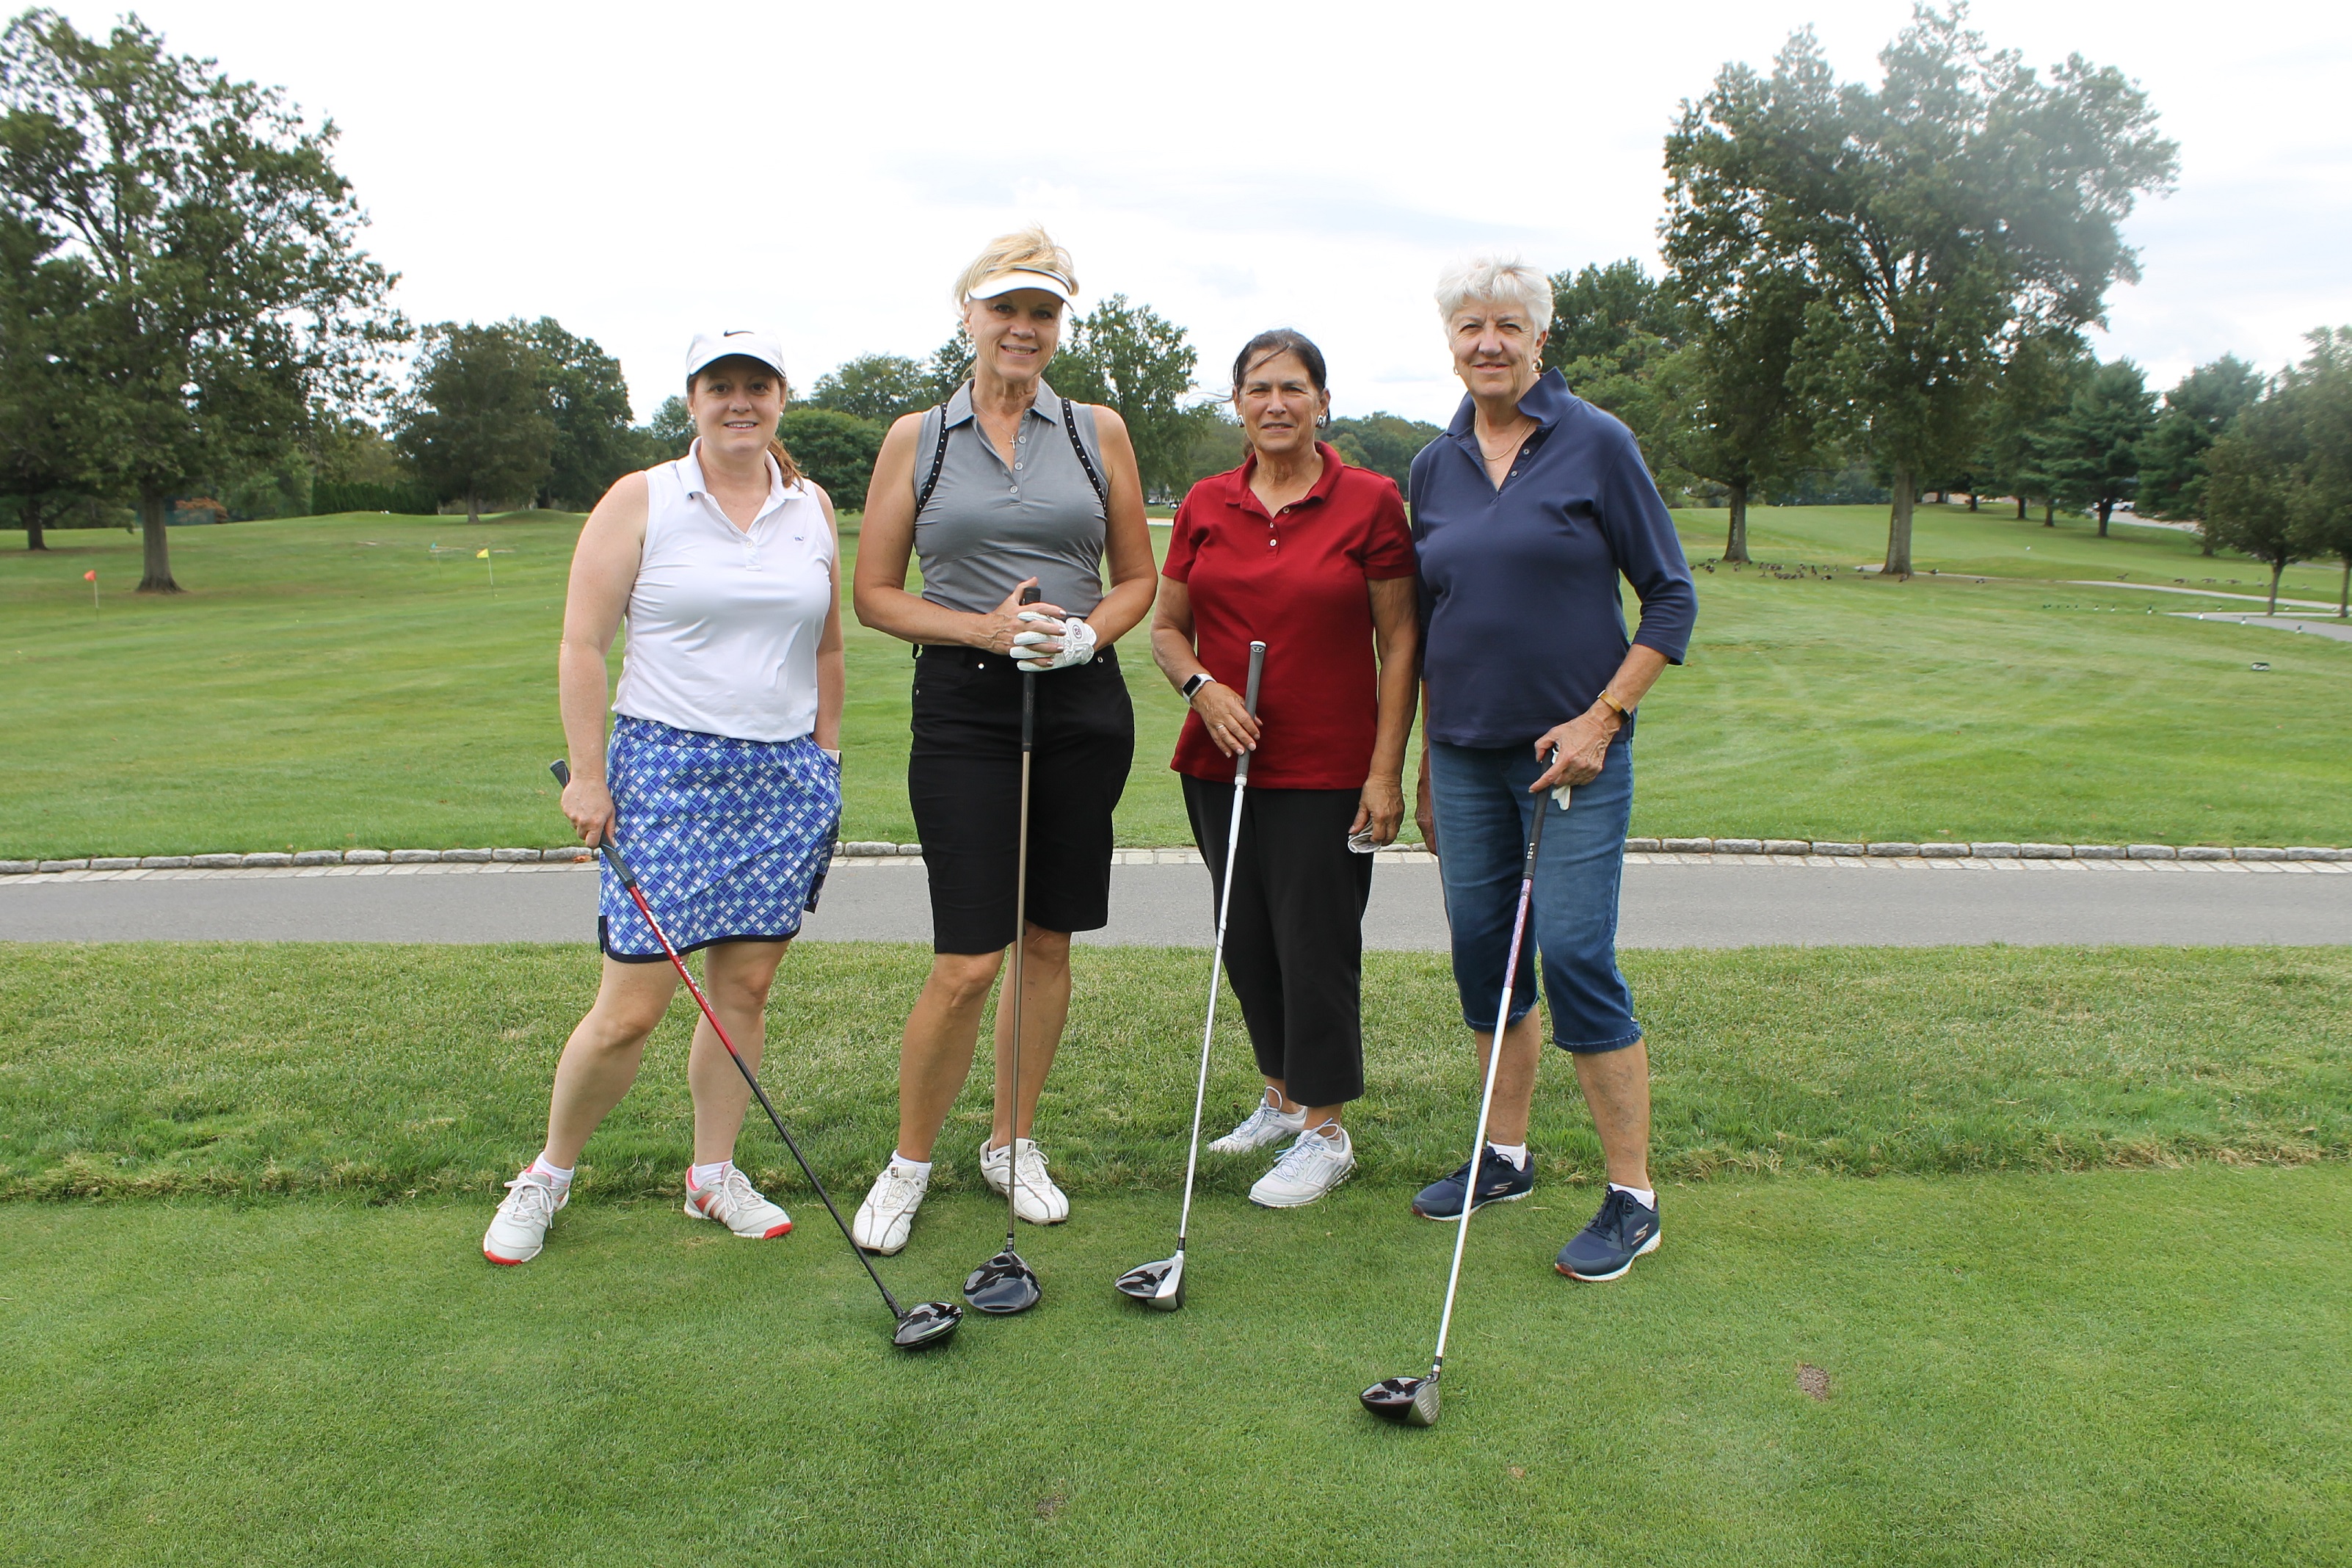 Kathleen McArdle (right), board member, with her foursome at the HOW 17th Annual Golf Invitational.